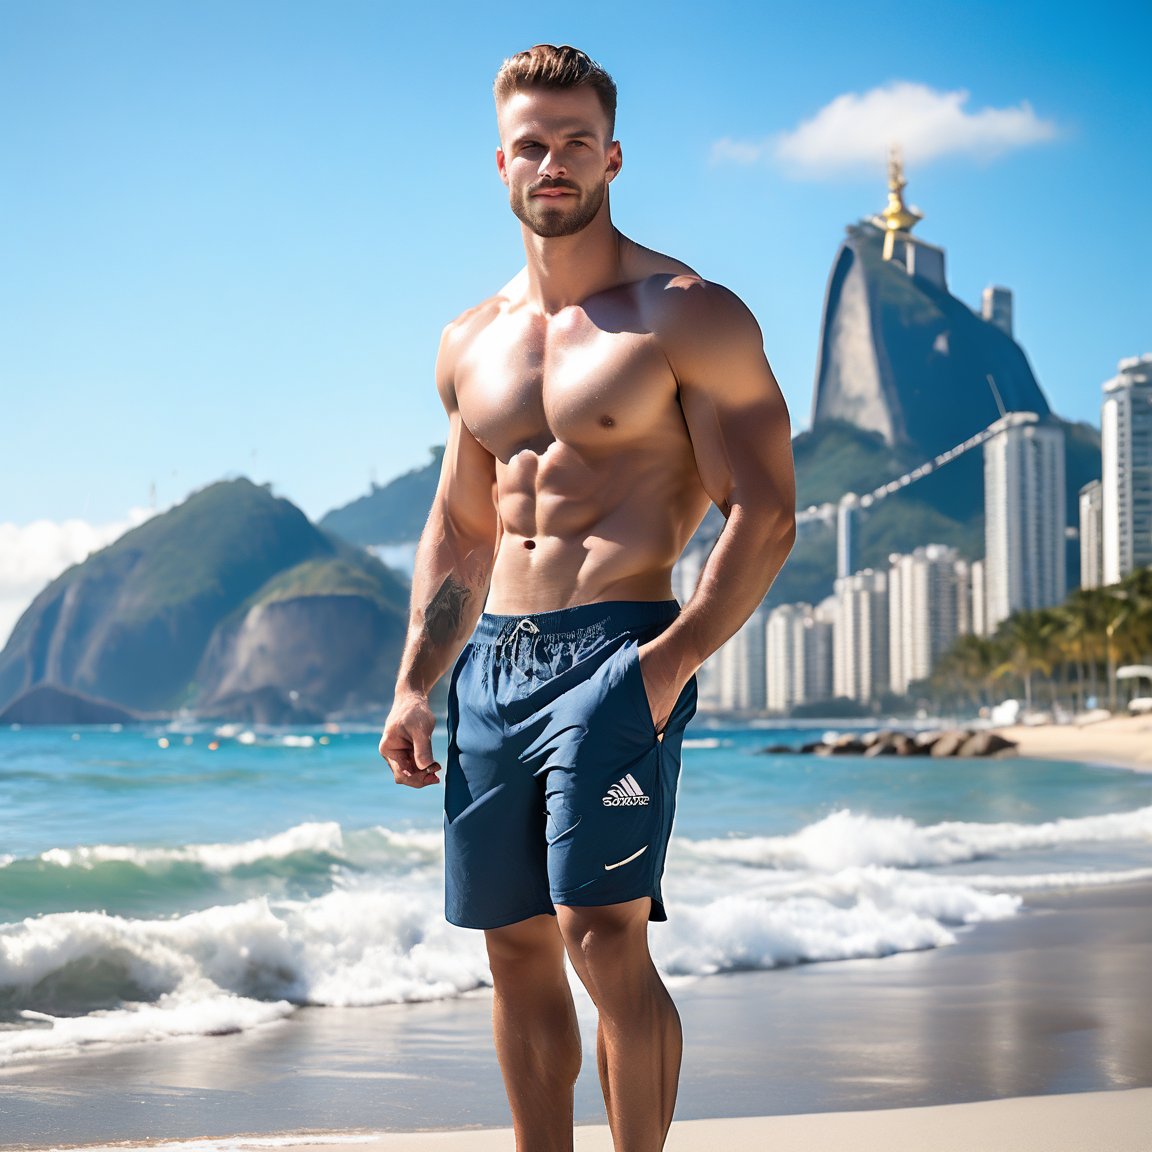 score_9, score_8_up, male focus, realistic head and body editorial photo shot firm focused on Jaeggernawt, a 25-year-old muscular manly man with a chiseled physique, stands confidently on the beach in Rio de Janeiro, Brazil. His intense gaze directly addresses the viewer as he crosses the shore, his brown hair blowing gently in the breeze. The softglow effect highlights his muscular frame, showcased by his broad shoulders and thick arms. He wears large summer shorts, he side-stands while beefy posing for editorial shot. A majestic tropical mountain looms in the distance, topped with the iconic Christ the Redeemer statue. In the foreground, the reflective sea meets the vibrant sky, creating a stunning composition. The image is captured using a Leica camera, with a 16k resolution and film grain effect. Jaeggernawt's facial expression exudes confidence and masculinity, his bright brown eyes seeming to pierce through the viewer. His athletic build is accentuated by his well-defined arms, torso, feet out of frame. A professional photorealism style maintains the high level of detail in every aspect of this stunning image, from the texture of his skin to the intricate design on his tattoos. photo, rating_safe,